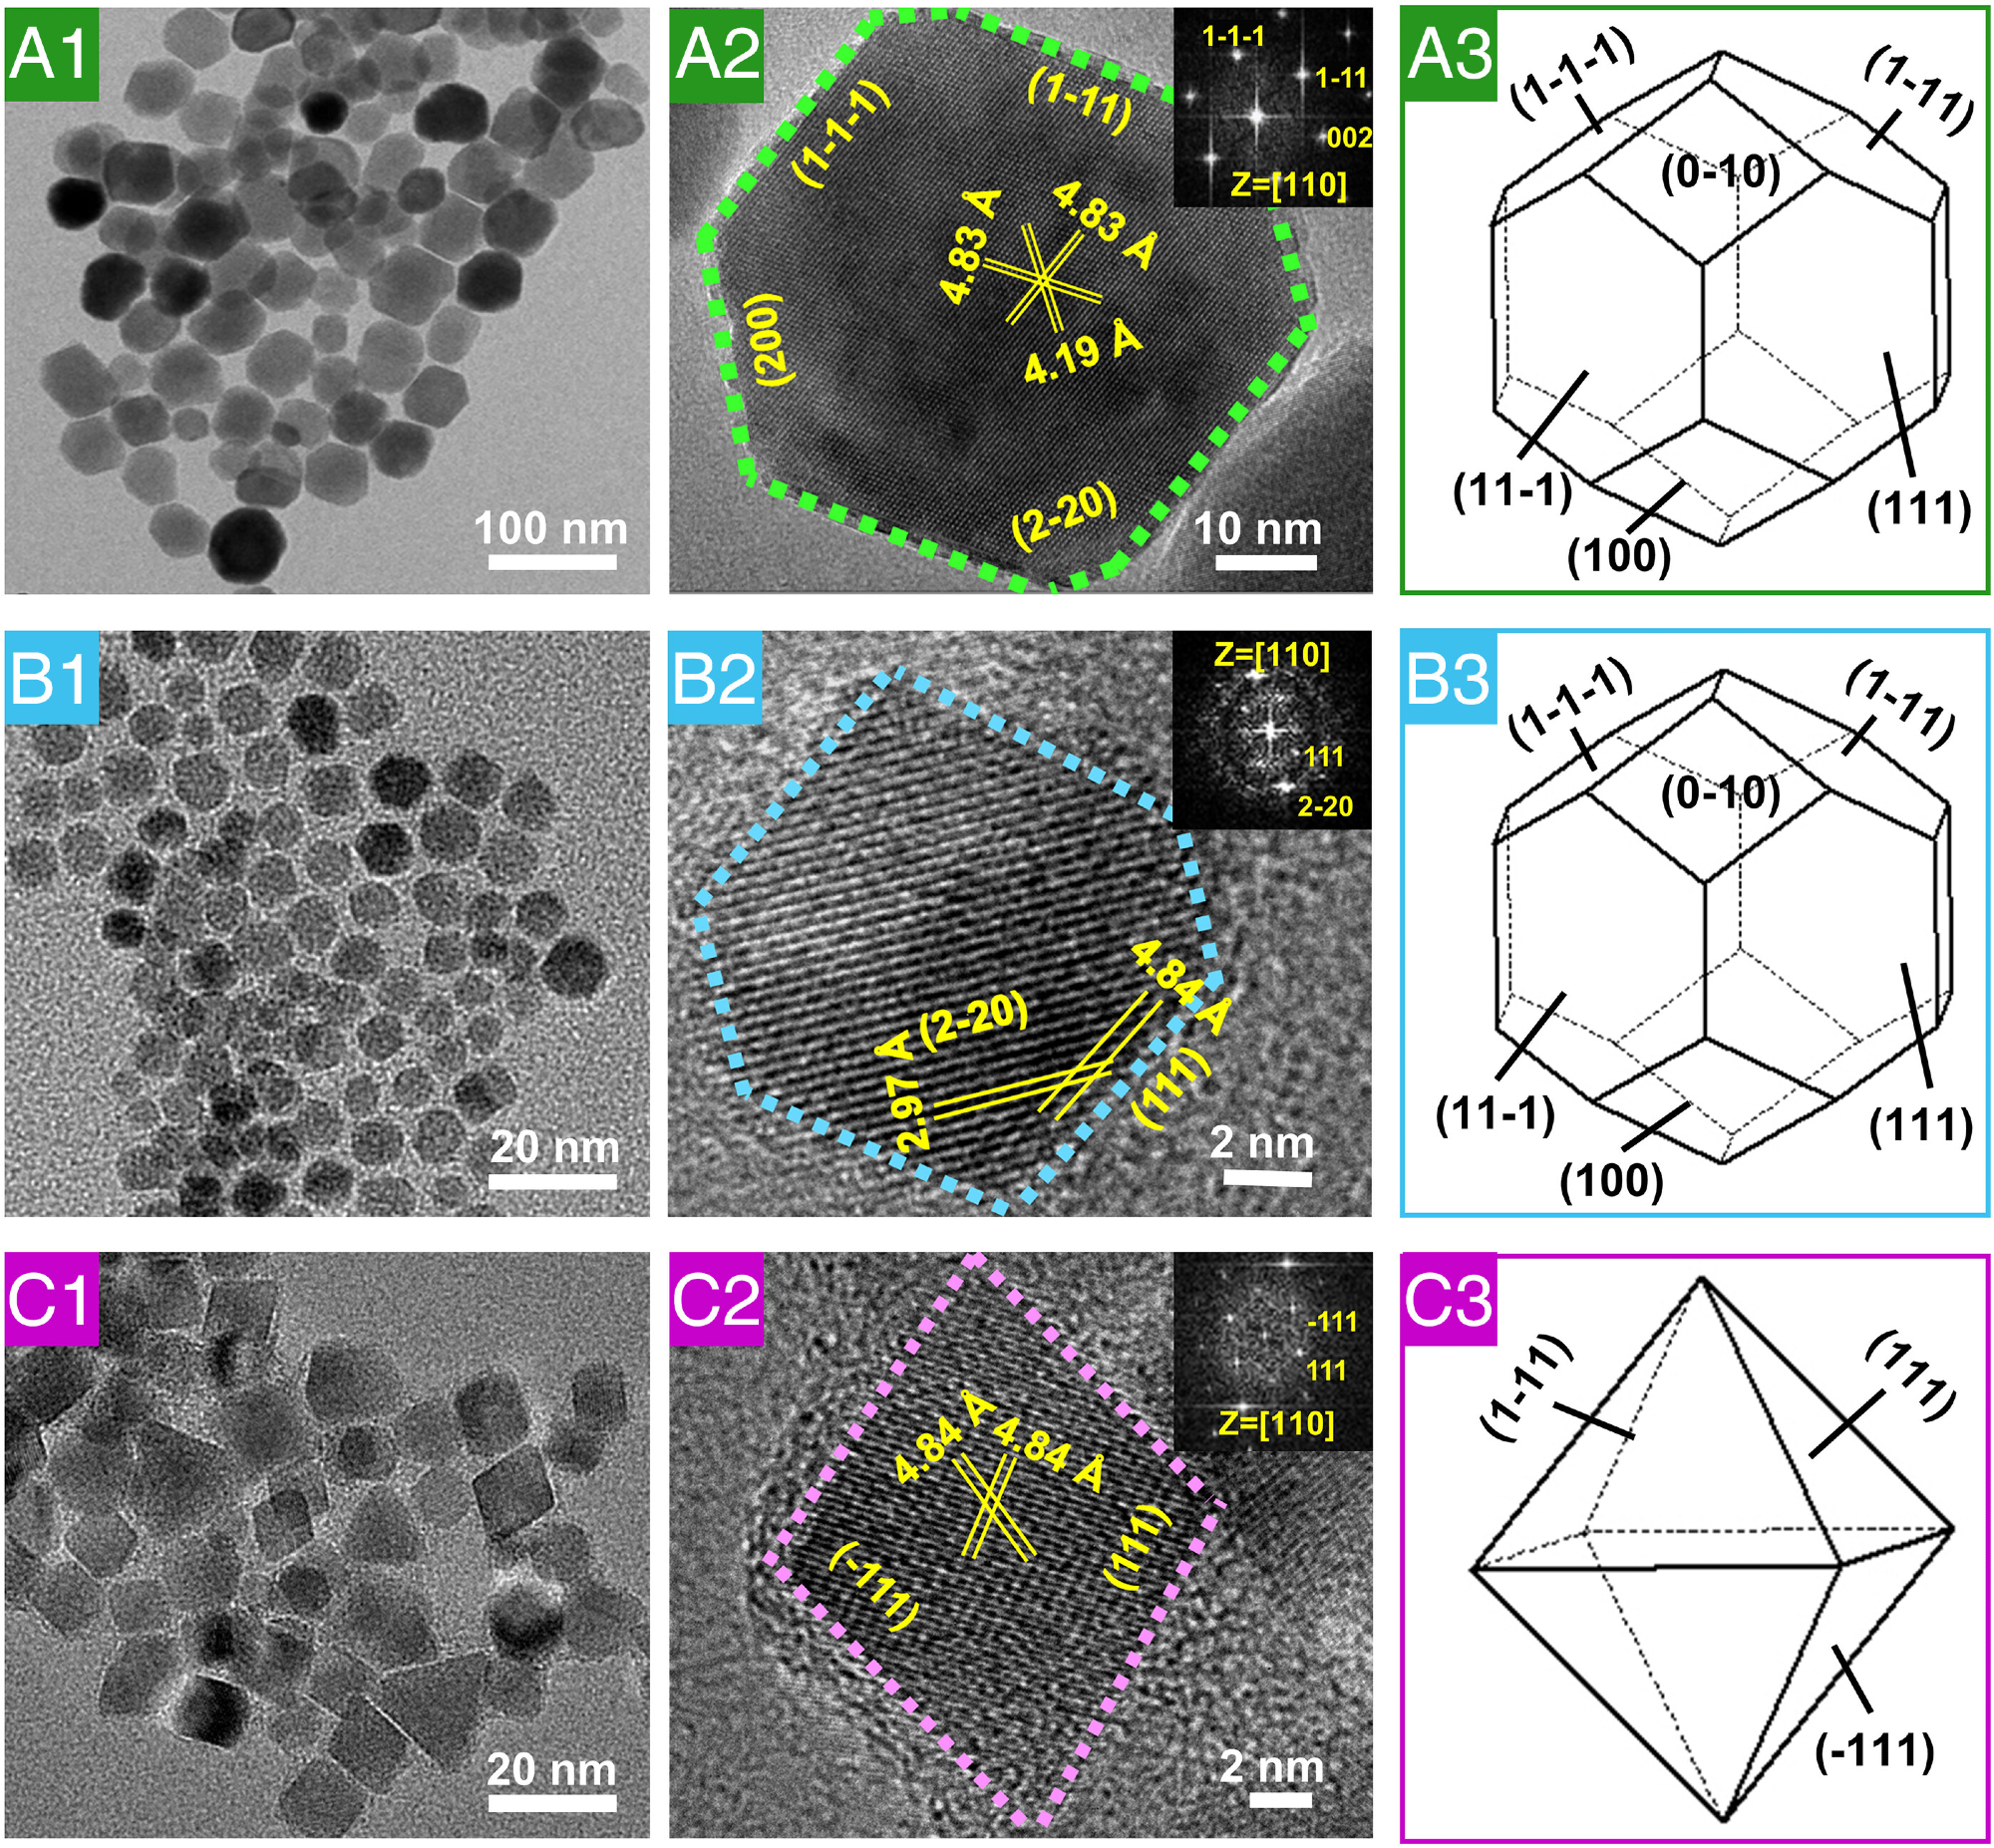 HRTEM characterization of natural magnetosomes, magnetosome-like MNPs, and magnetic nanocrystals from the control reaction. (A1) and (A2) High-resolution electron micrographs and (A3) three-dimensional morphology of natural magnetosome crystals from AMB-1. (B1) and (B2) High-resolution electron micrographs and (B3) three-dimensional morphology of magnetosome-like MNPs. (C1) and (C2) High-resolution electron micrographs and (C3) three-dimensional morphology of MNPs from the control reaction. The insets in (A2), (B2), and (C2) show the corresponding fast Fourier transform patterns of the crystal structure.